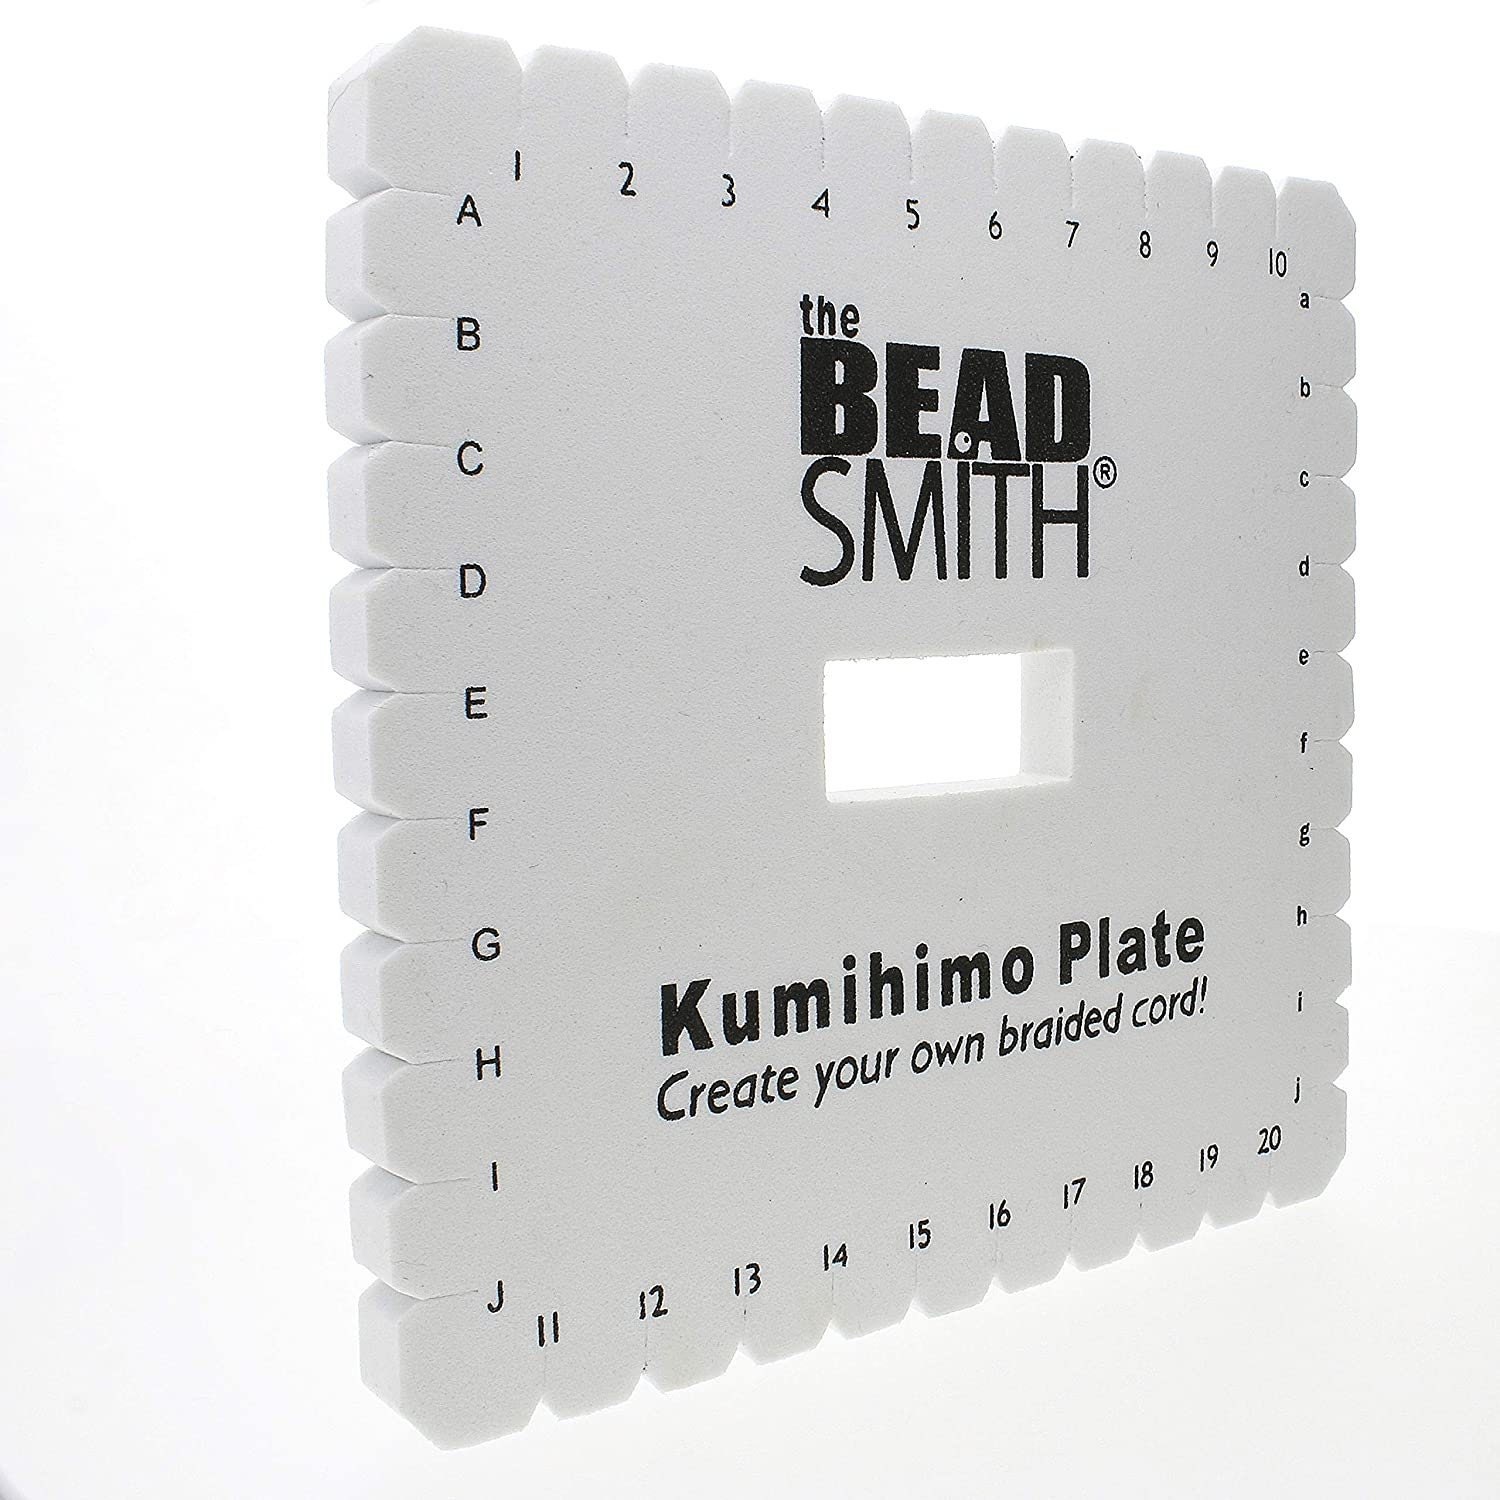  The Beadsmith Round Kumihimo Disk, 4.25 inch Diameter, 0.75”  (20mm) Thick Double Dense Foam, Jewelry Tools for Braiding, 1 disks